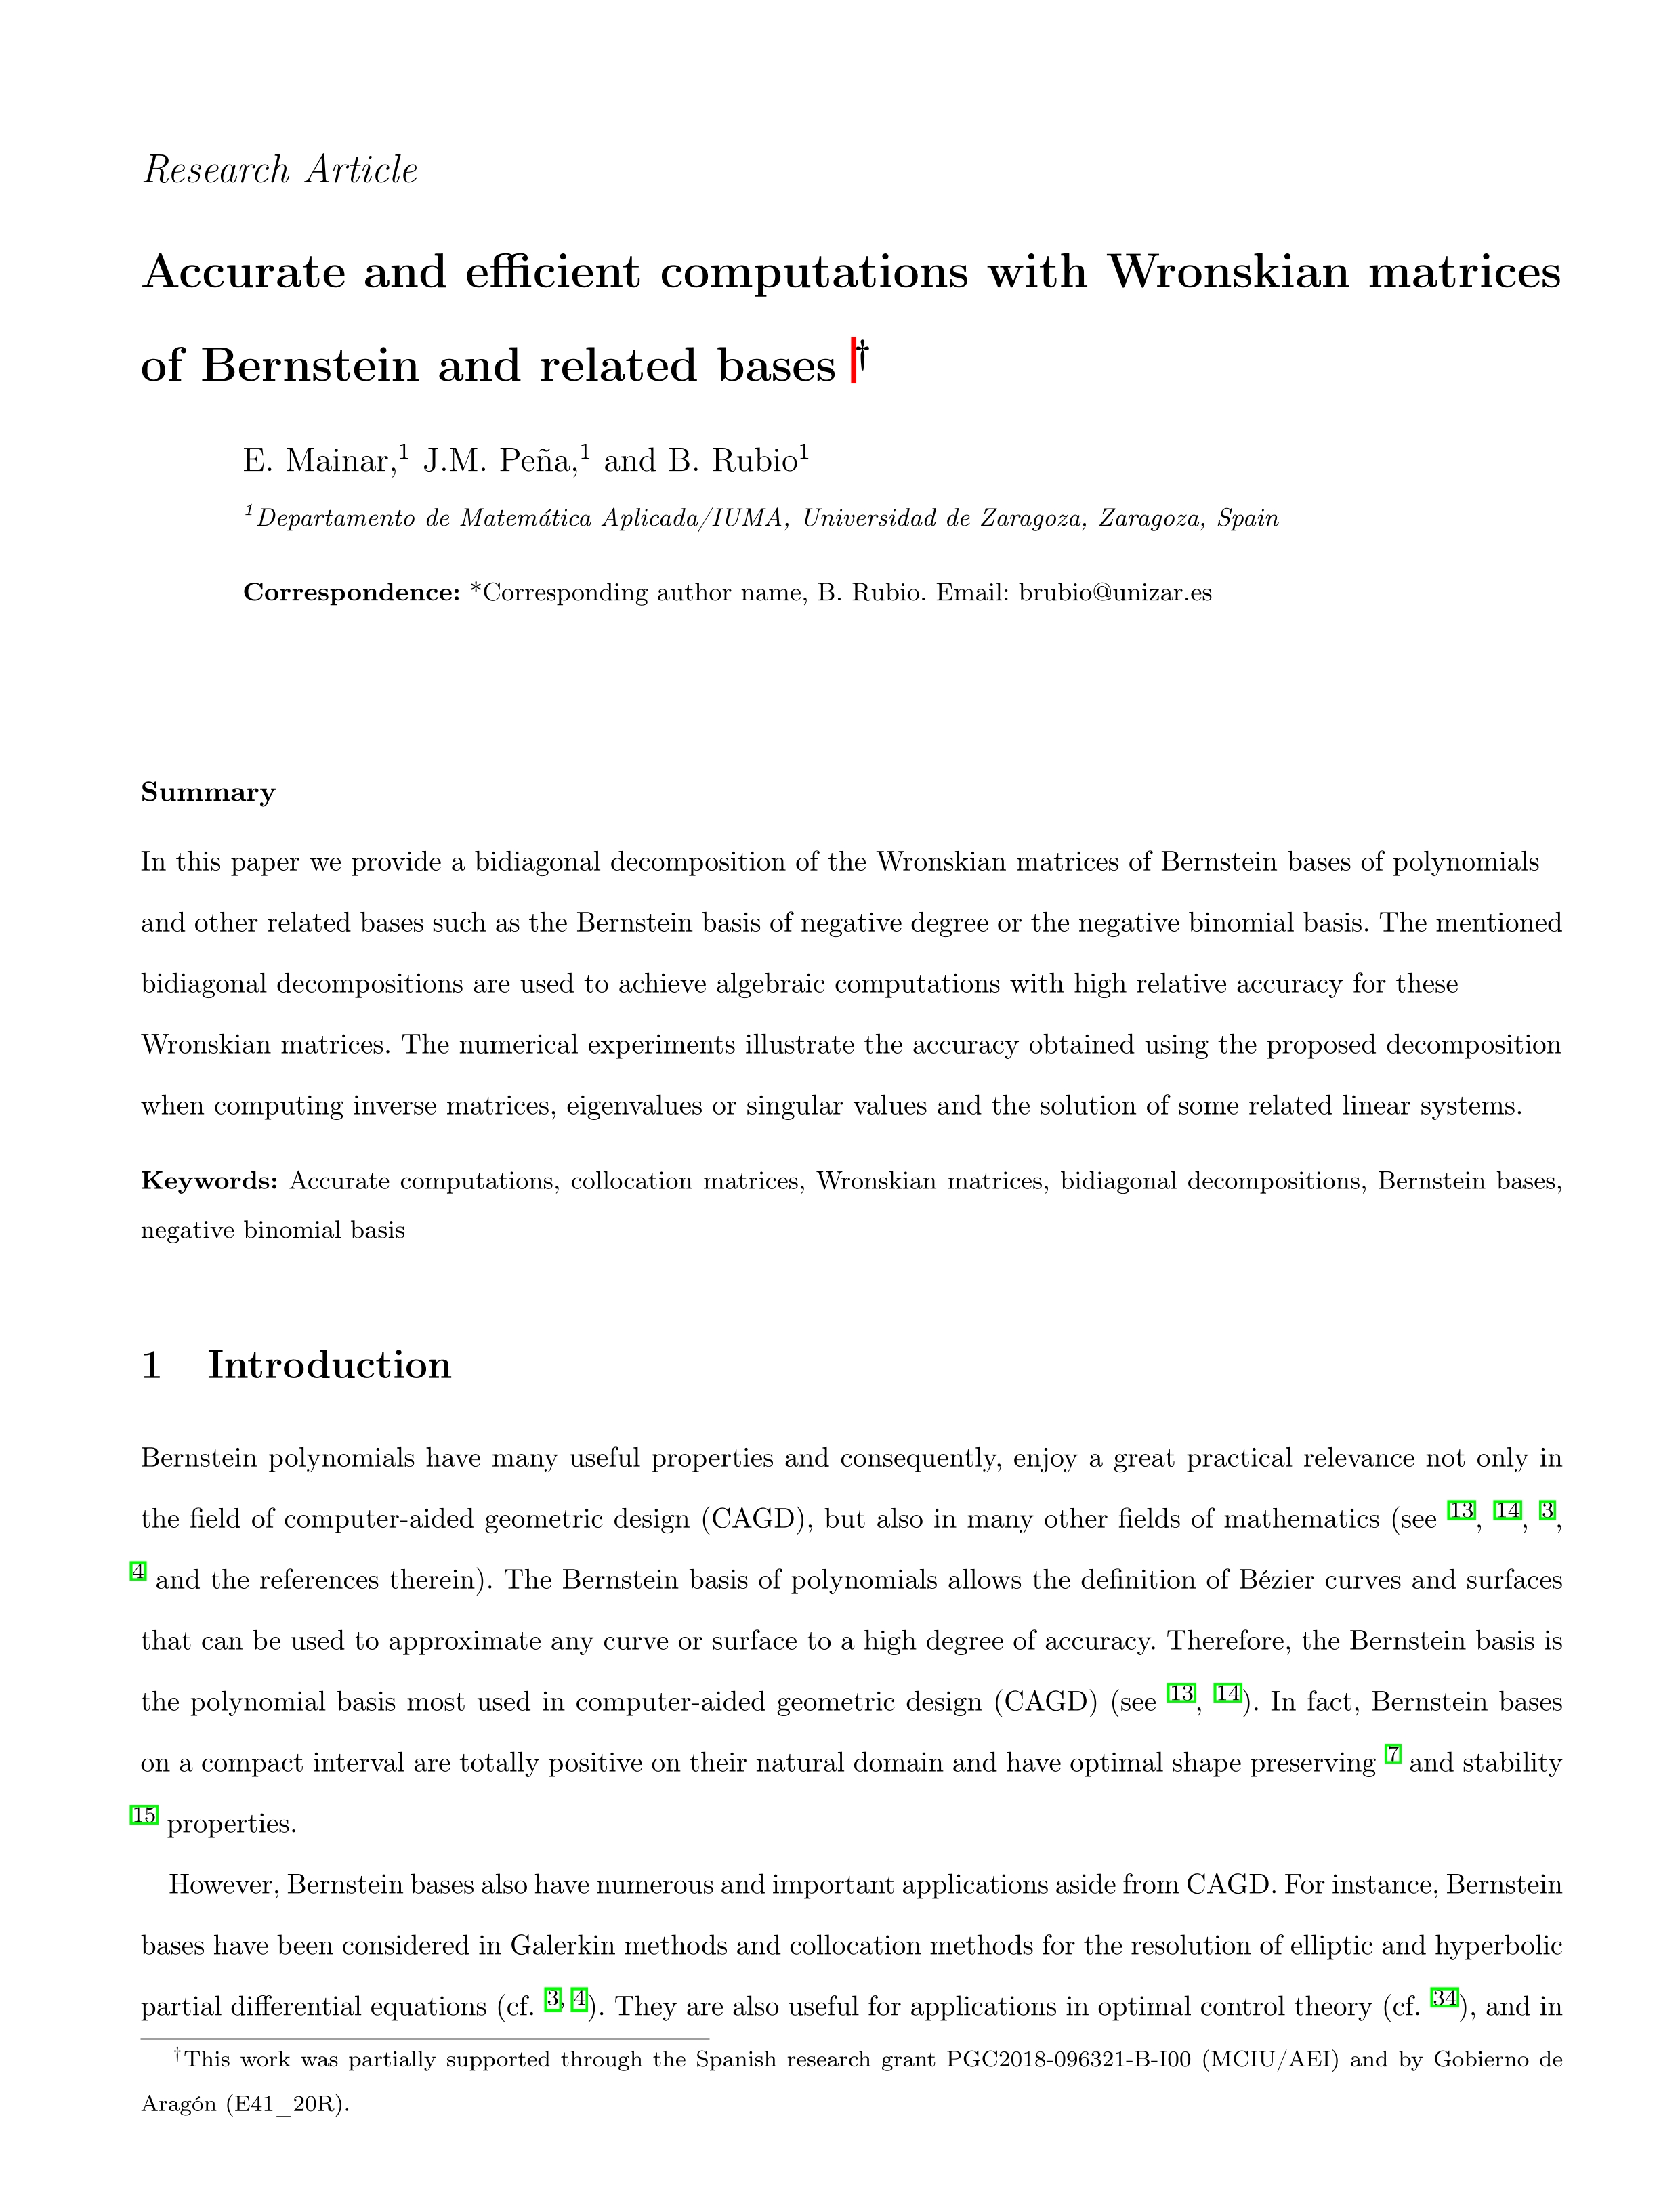 Accurate and efficient computations with Wronskian matrices of Bernstein and related bases